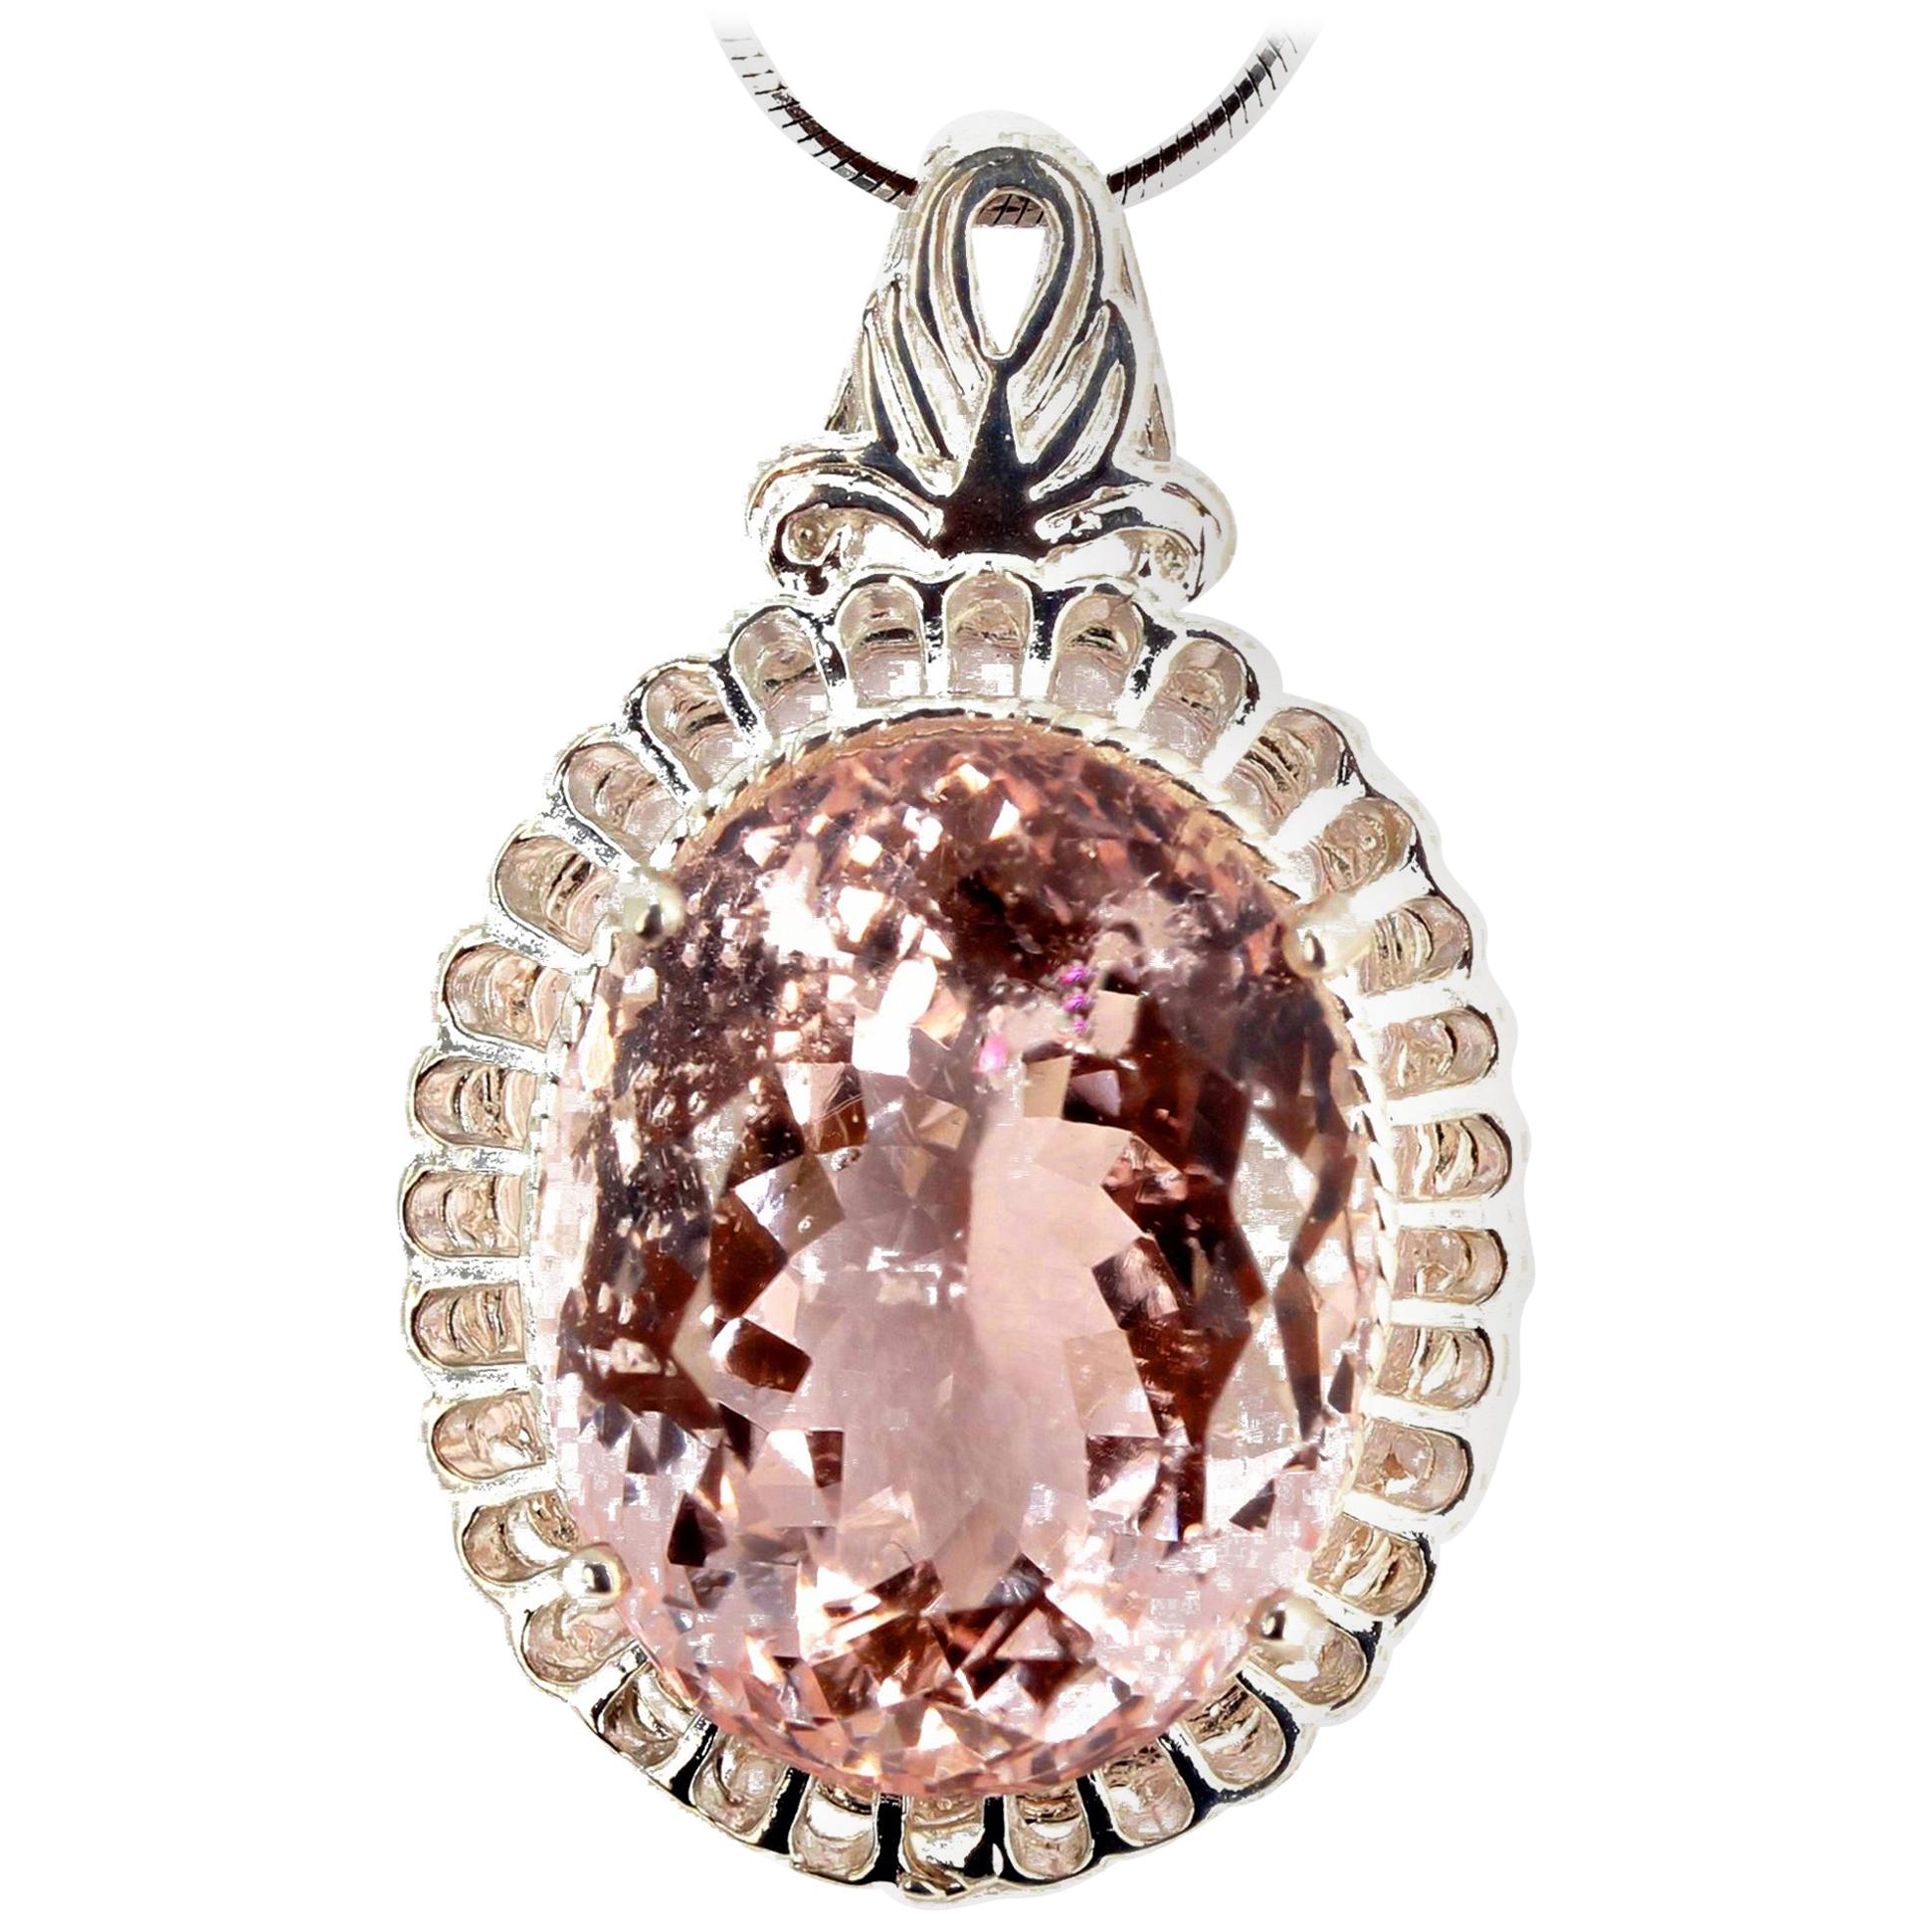 AJD Huge Gorgeous 25 Cts Fiery RARE Morganite Sterling Silver Pendant For Sale